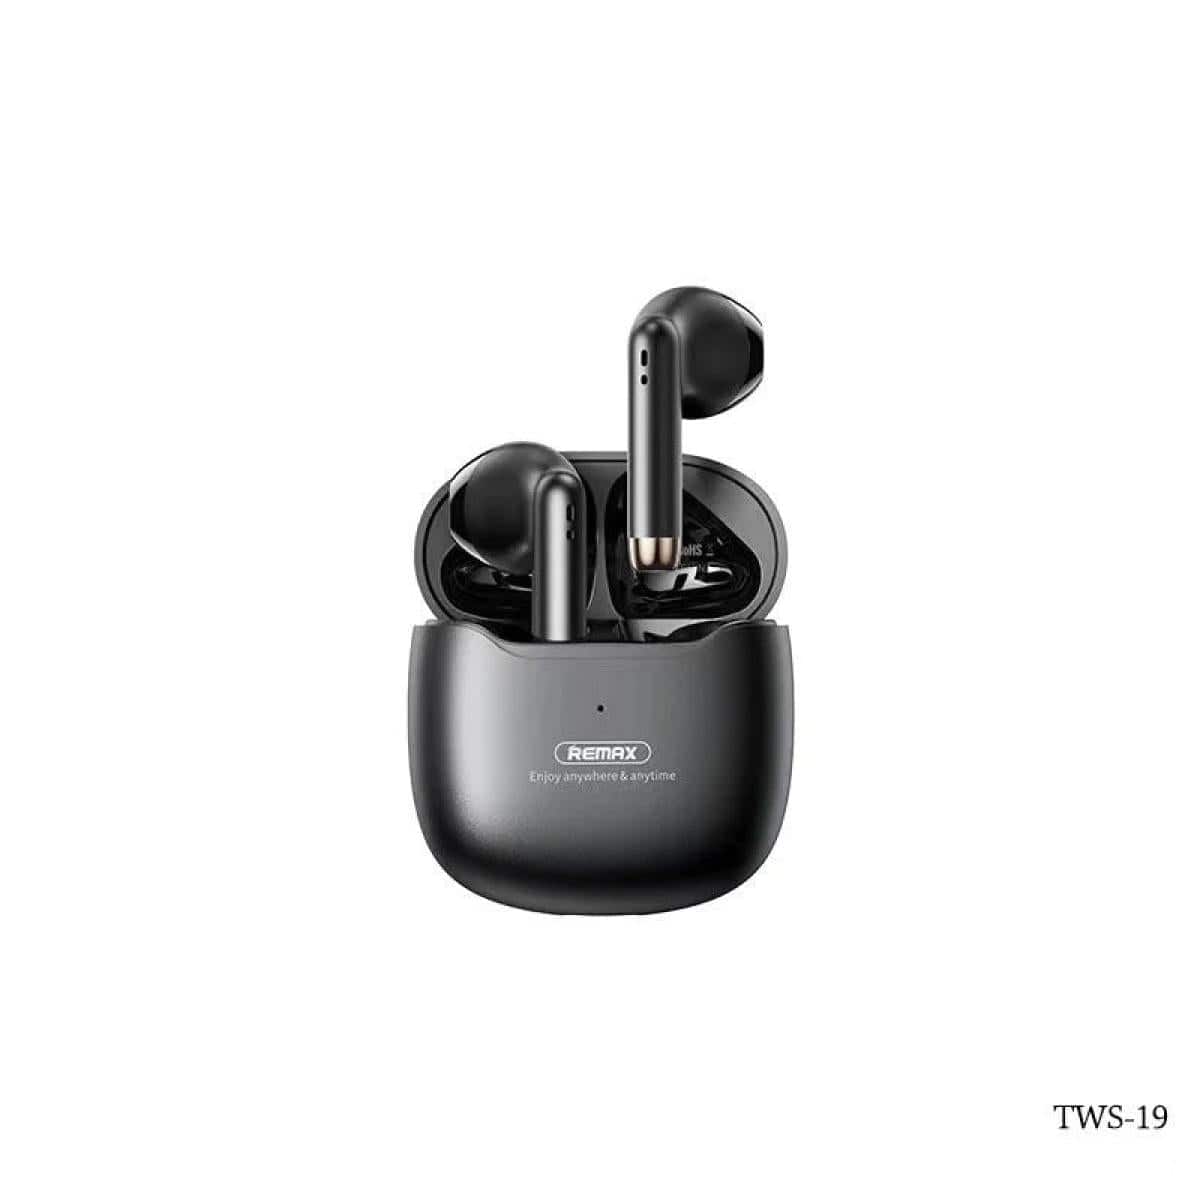 REMAX AirPods BLACK Remax TWS-19 Marshmallow Series True Wireless Stereo Earbuds